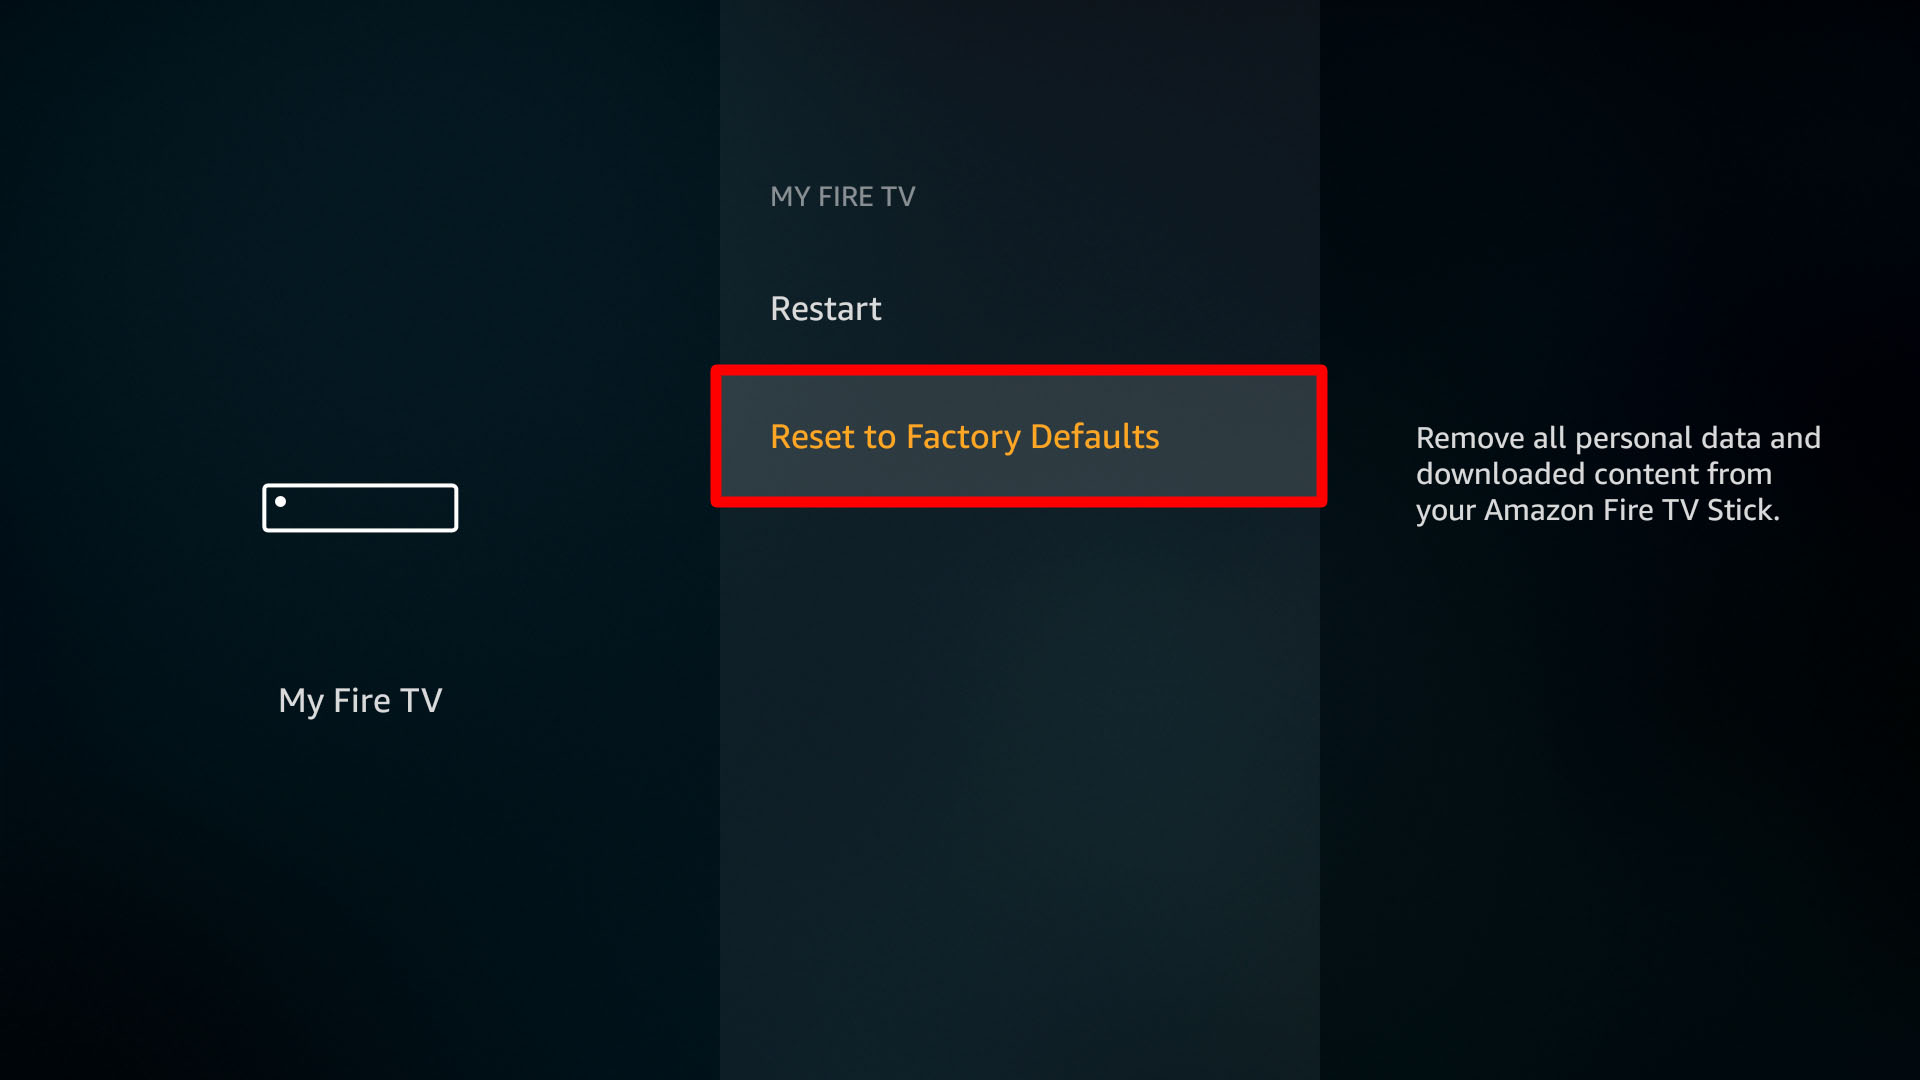 Amazon Fire Stick TV Reset to Factory Defaults